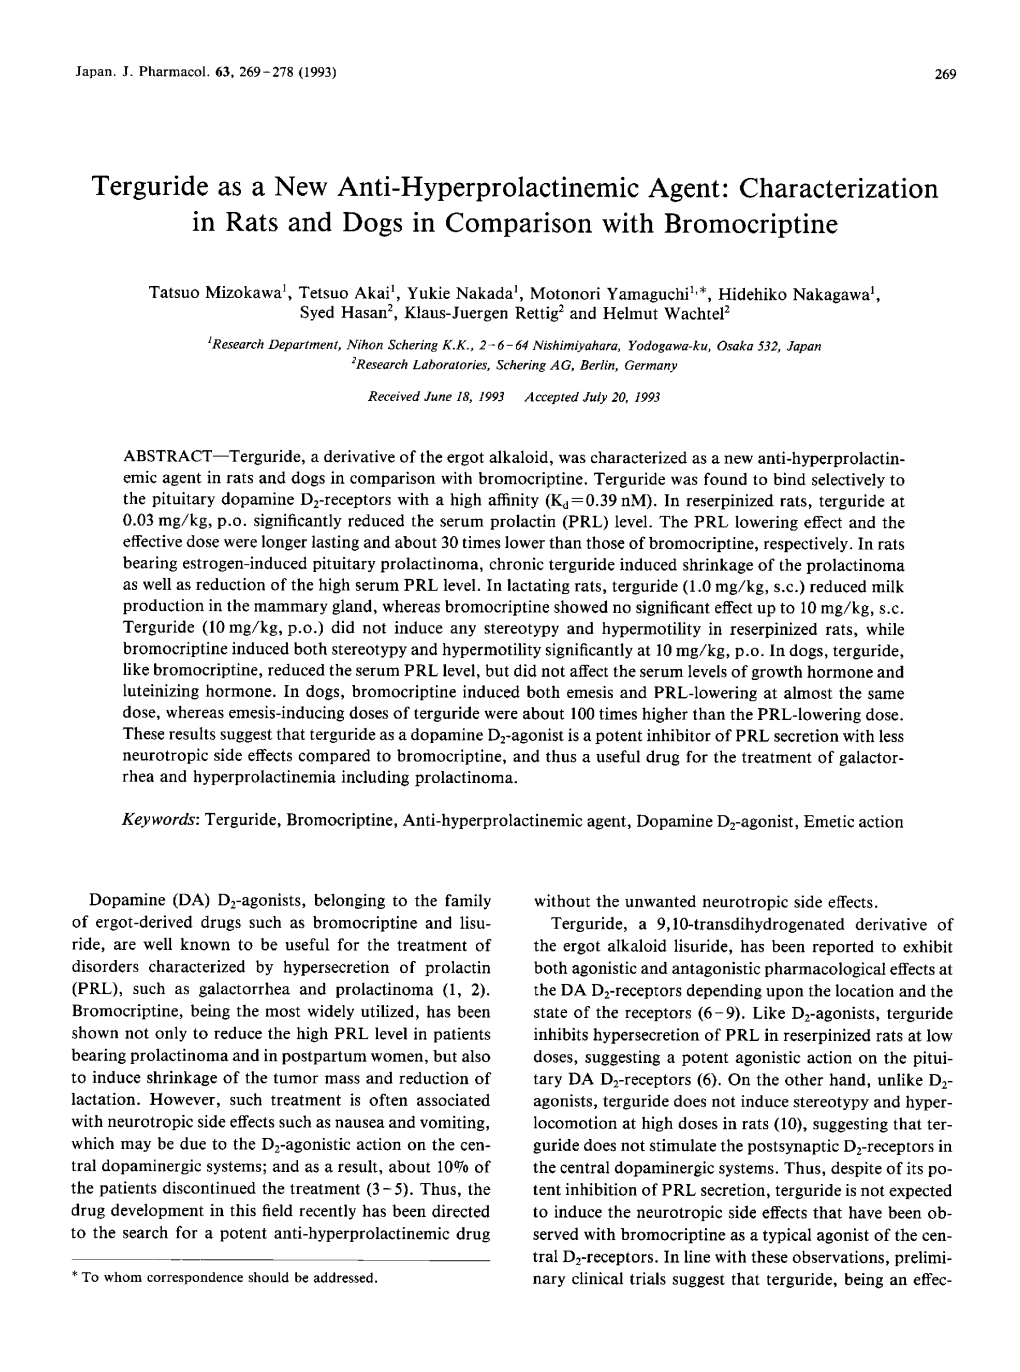 Terguride As a New Anti-Hyperprolactinemic Agent: Characterization in Rats and Dogs in Comparison with Bromocriptine